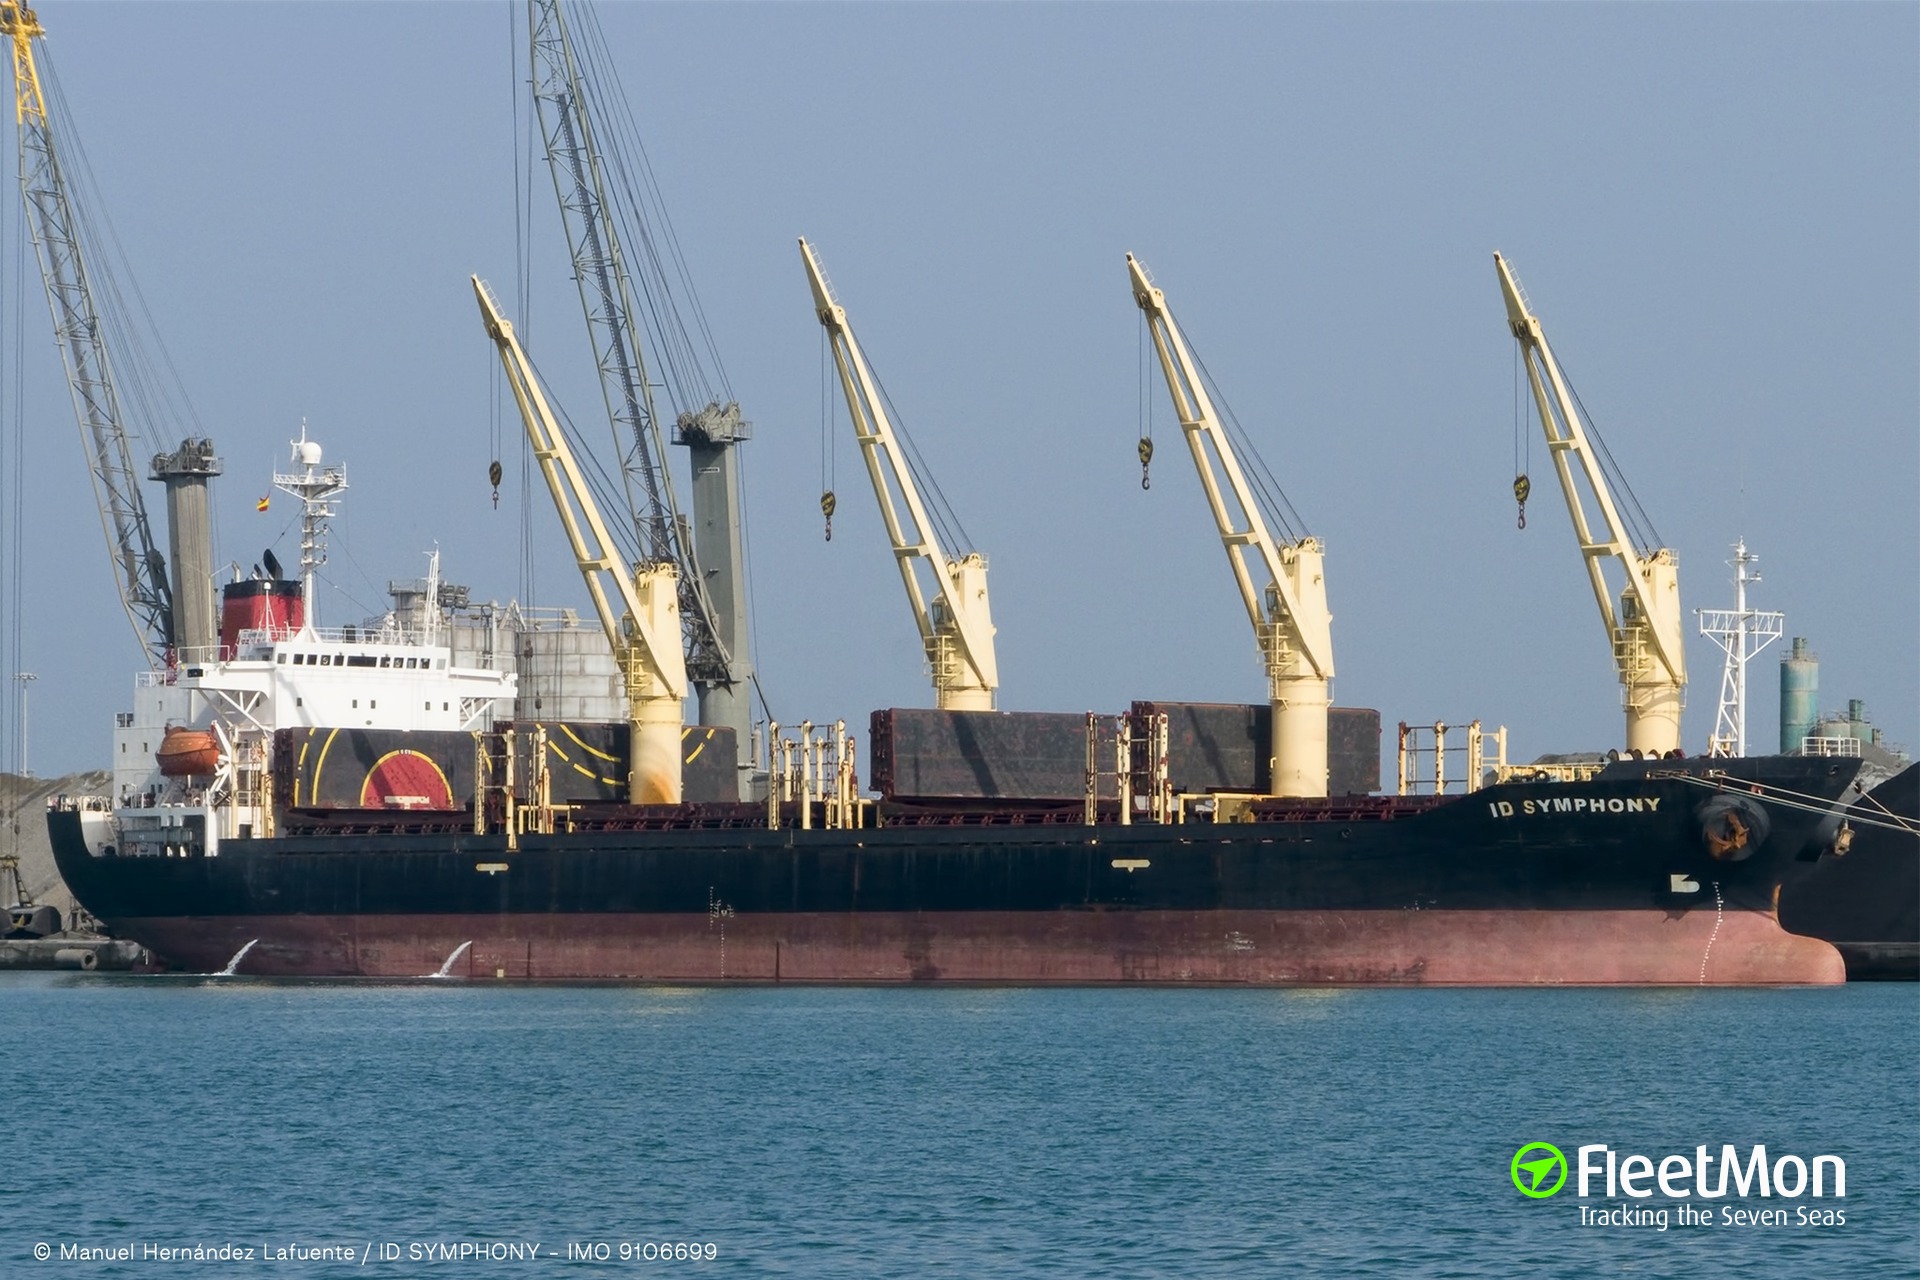 Port of Gresik, Indonesia - Arrivals, schedule and weather forecast